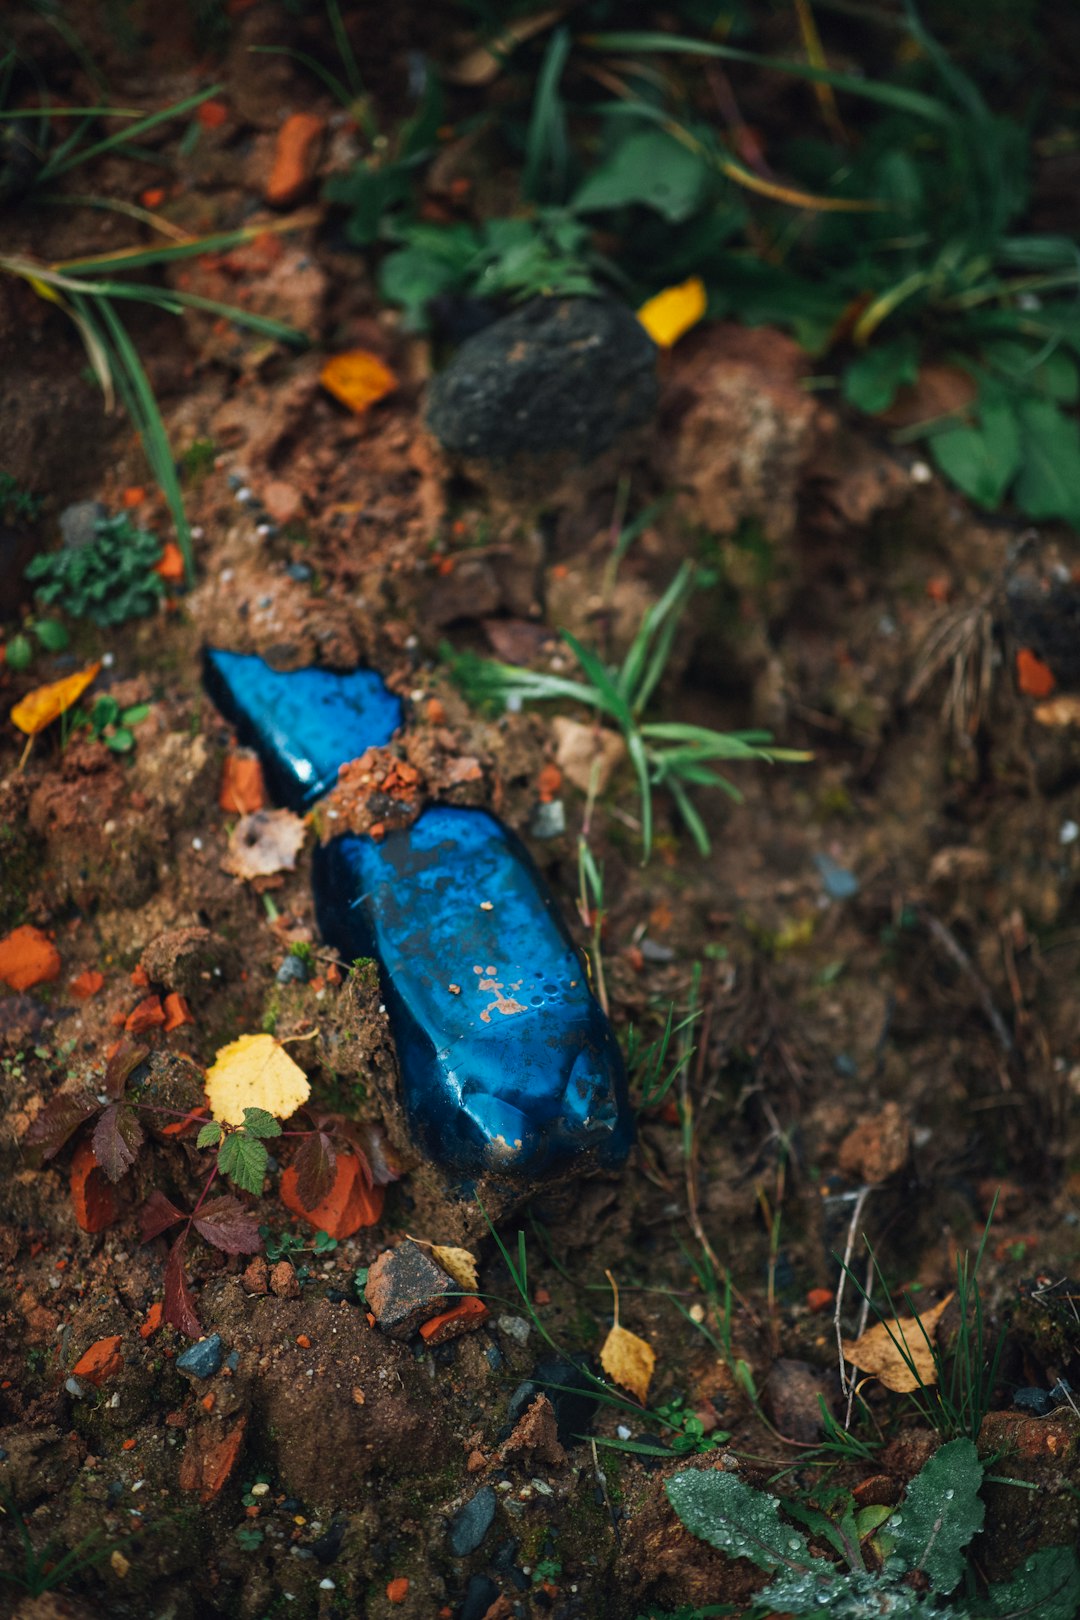 blue plastic bottle on brown dried leaves